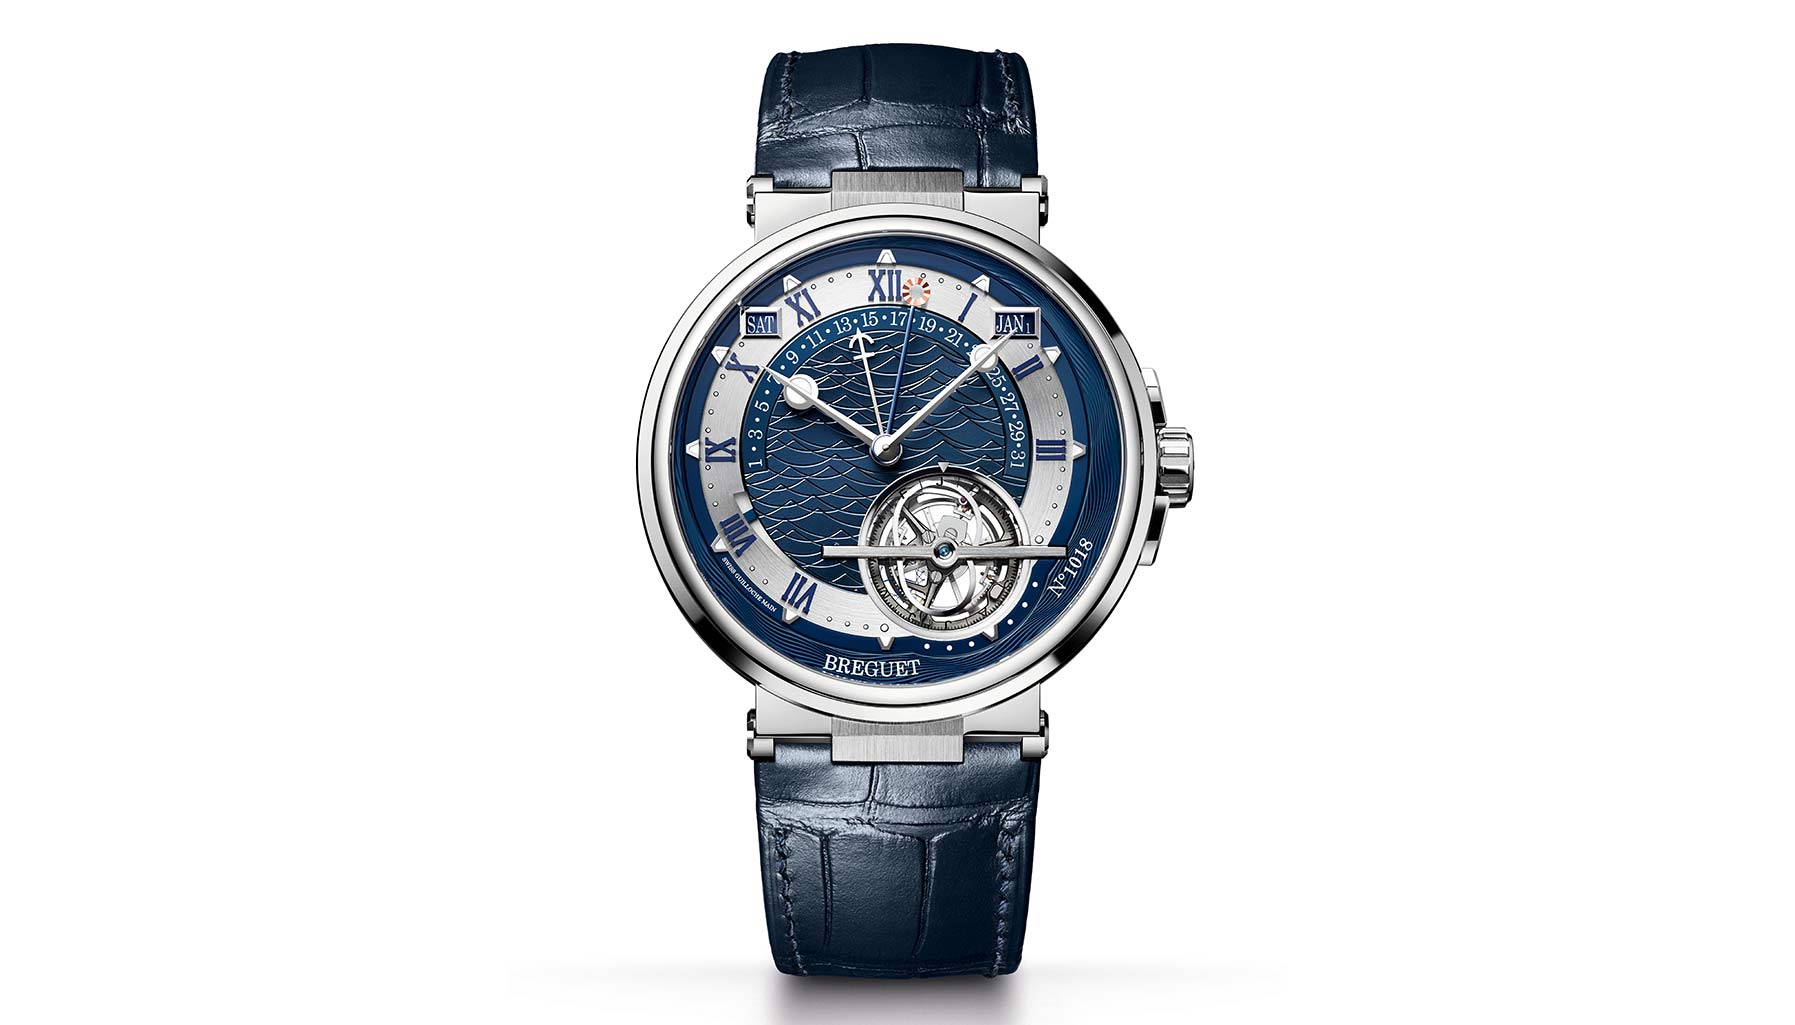 The Breguet Marine continues the legacy of luxury marine chronometers ...